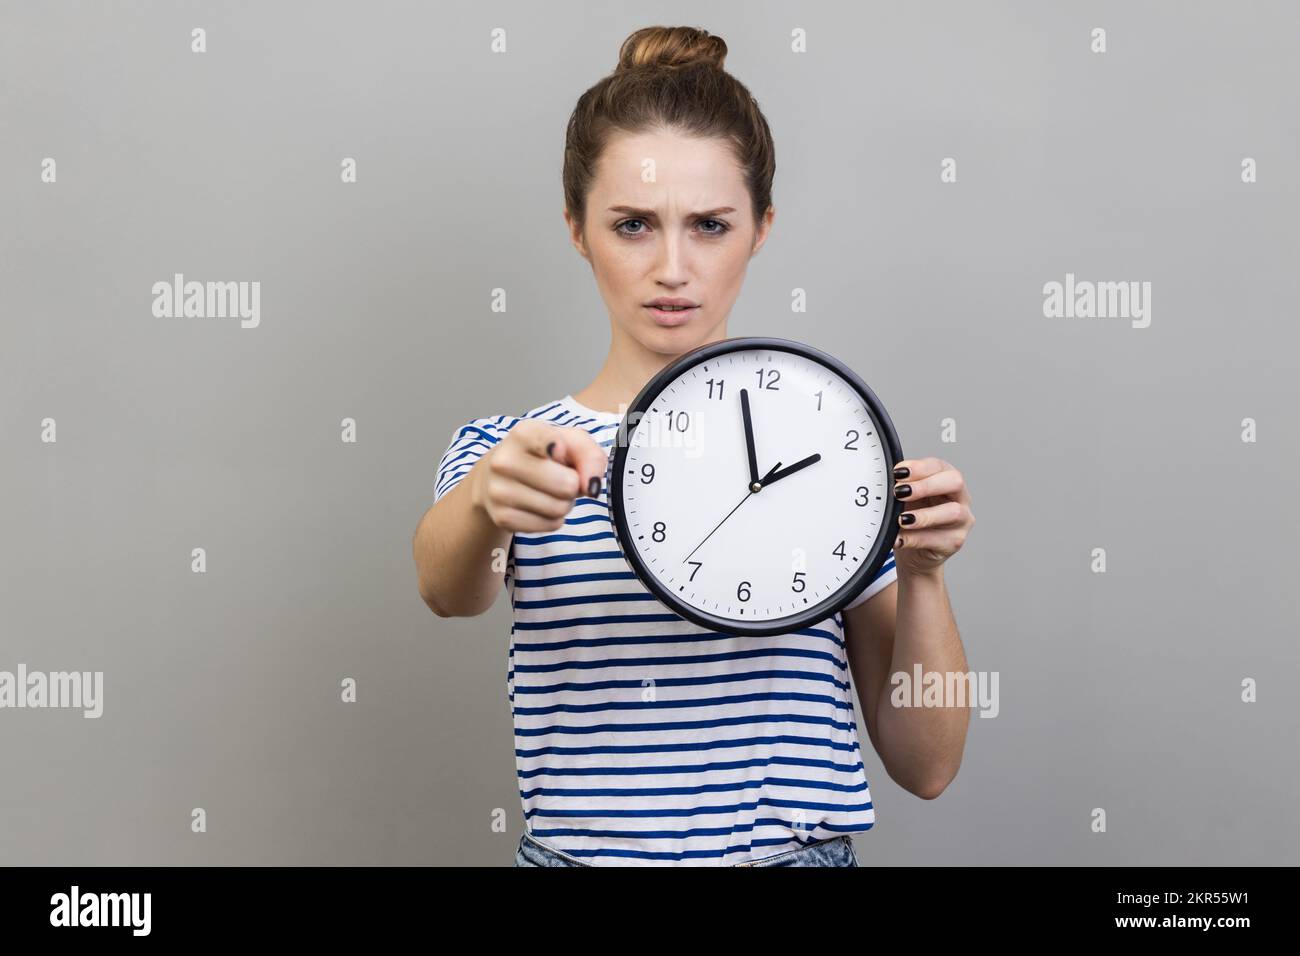 Portrait of bossy serious woman wearing striped T-shirt pointing finger at you holding in hand big wall clock, motivation. Indoor studio shot isolated on gray background. Stock Photo